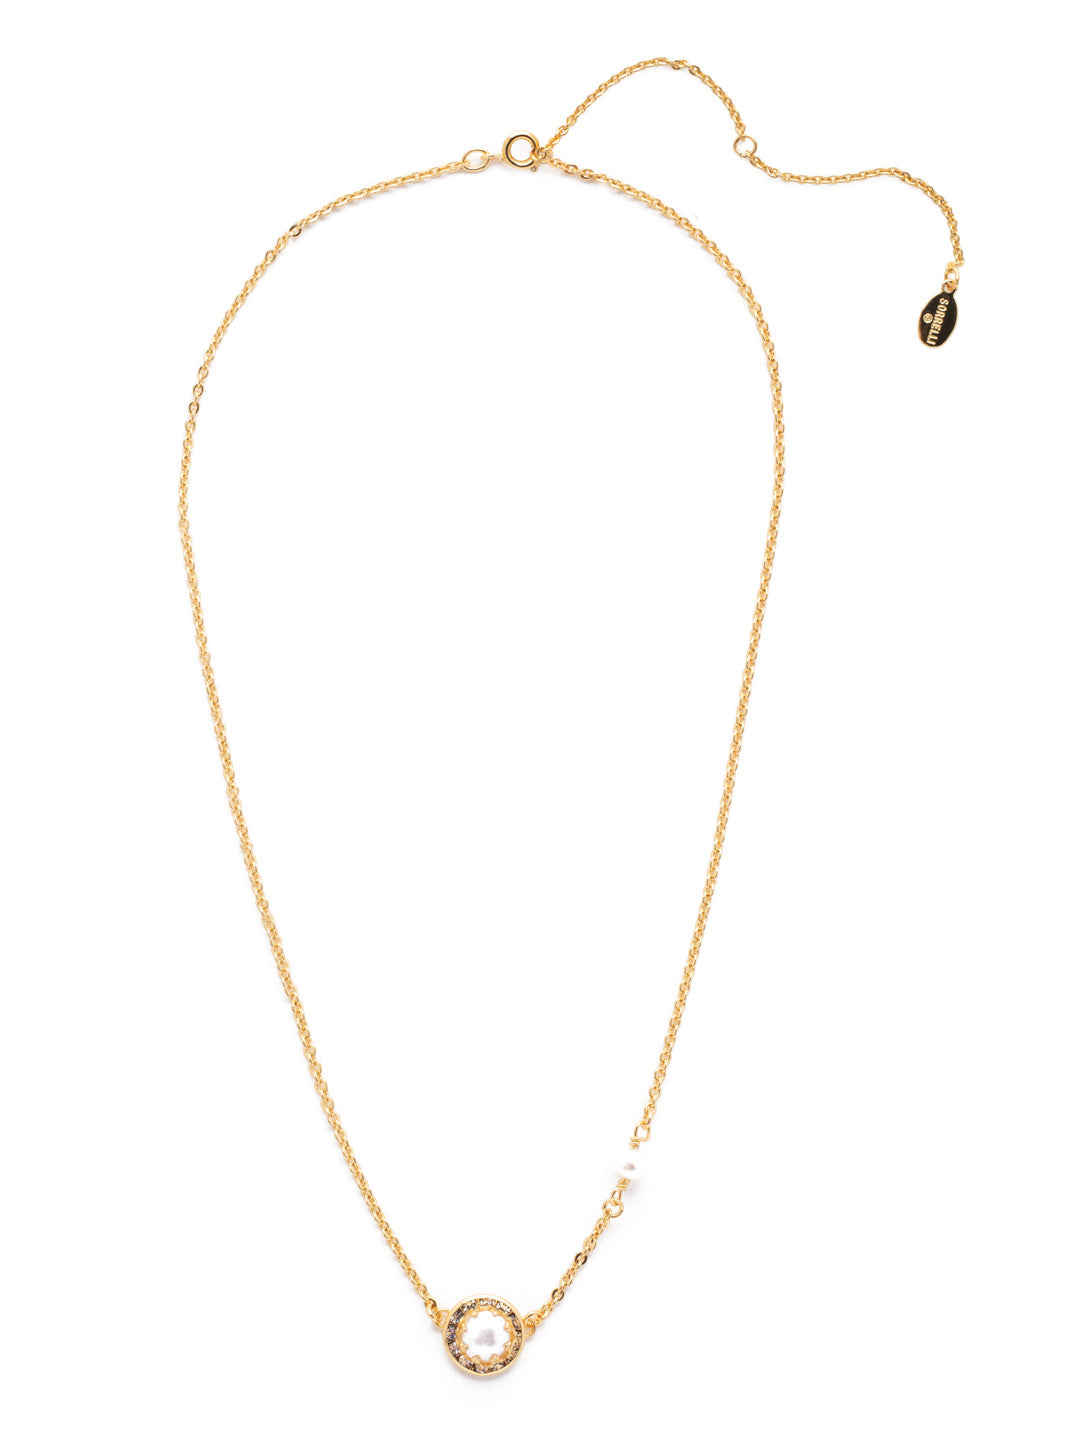 Blair Pendant Necklace - NEV105BGCRY - <p>The Blair Pendant Necklace is the perfect dainty piece to wear with everything! A freshwater pearl takes the spotlight, set in a halo of crystals, while a single delicate pearl sits offset on the adjustable chain. A spring ring clasp secures the necklace. From Sorrelli's Crystal collection in our Bright Gold-tone finish.</p>